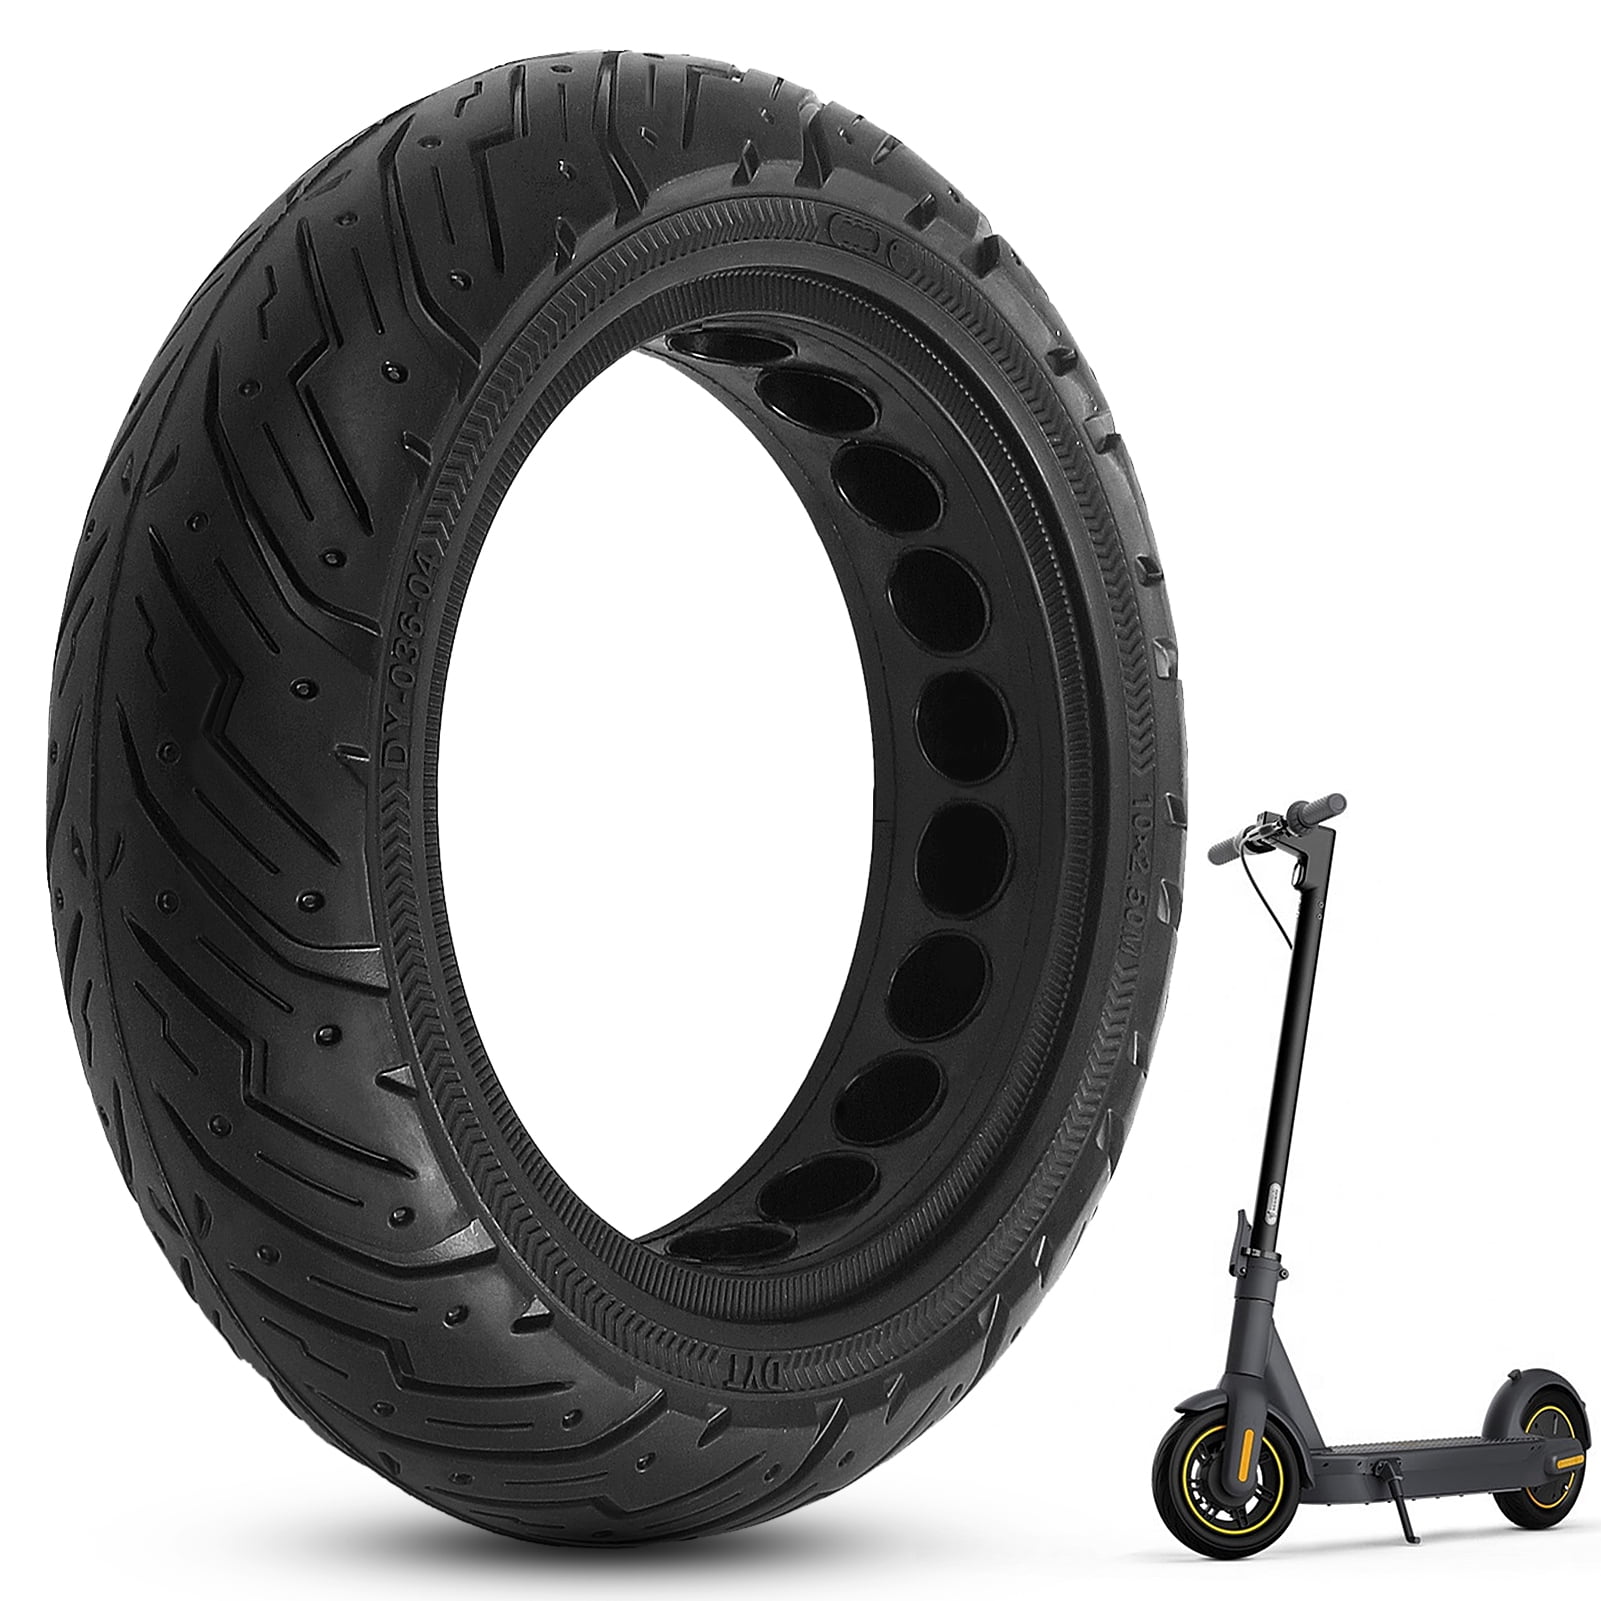 2x Tires for Ninebot Max G30 with TORN PROOF Sealant Segway Electric Scooter 10" 